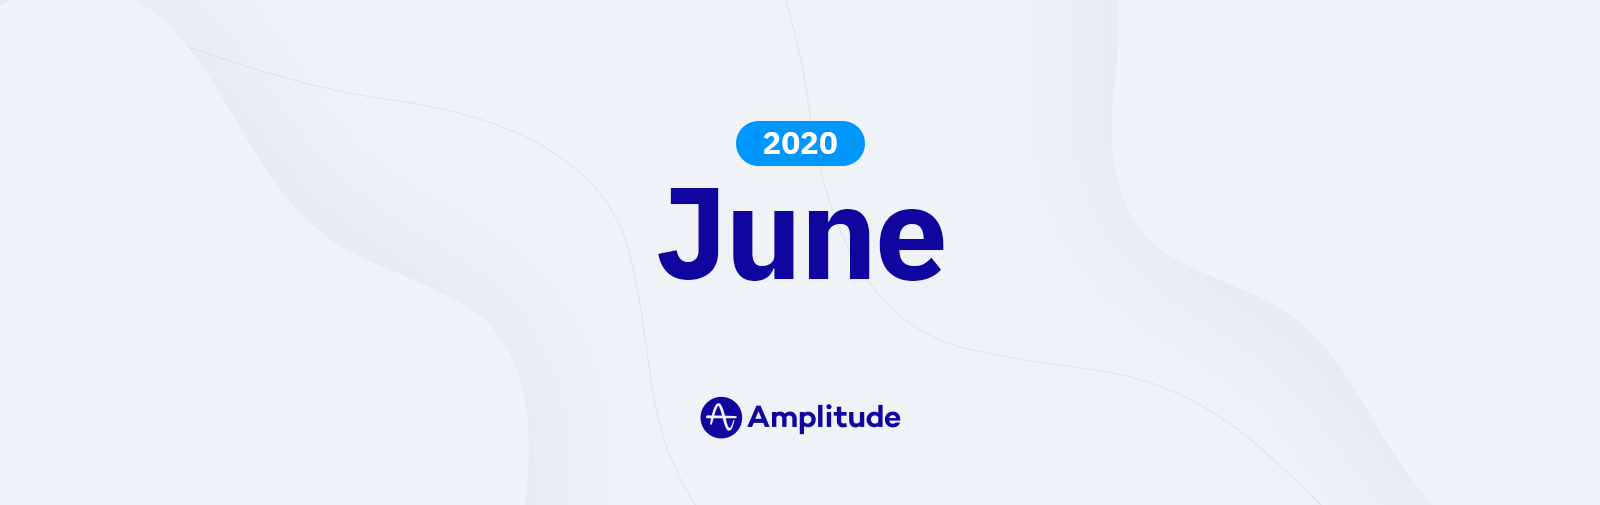 Release Notes June 2020 Large